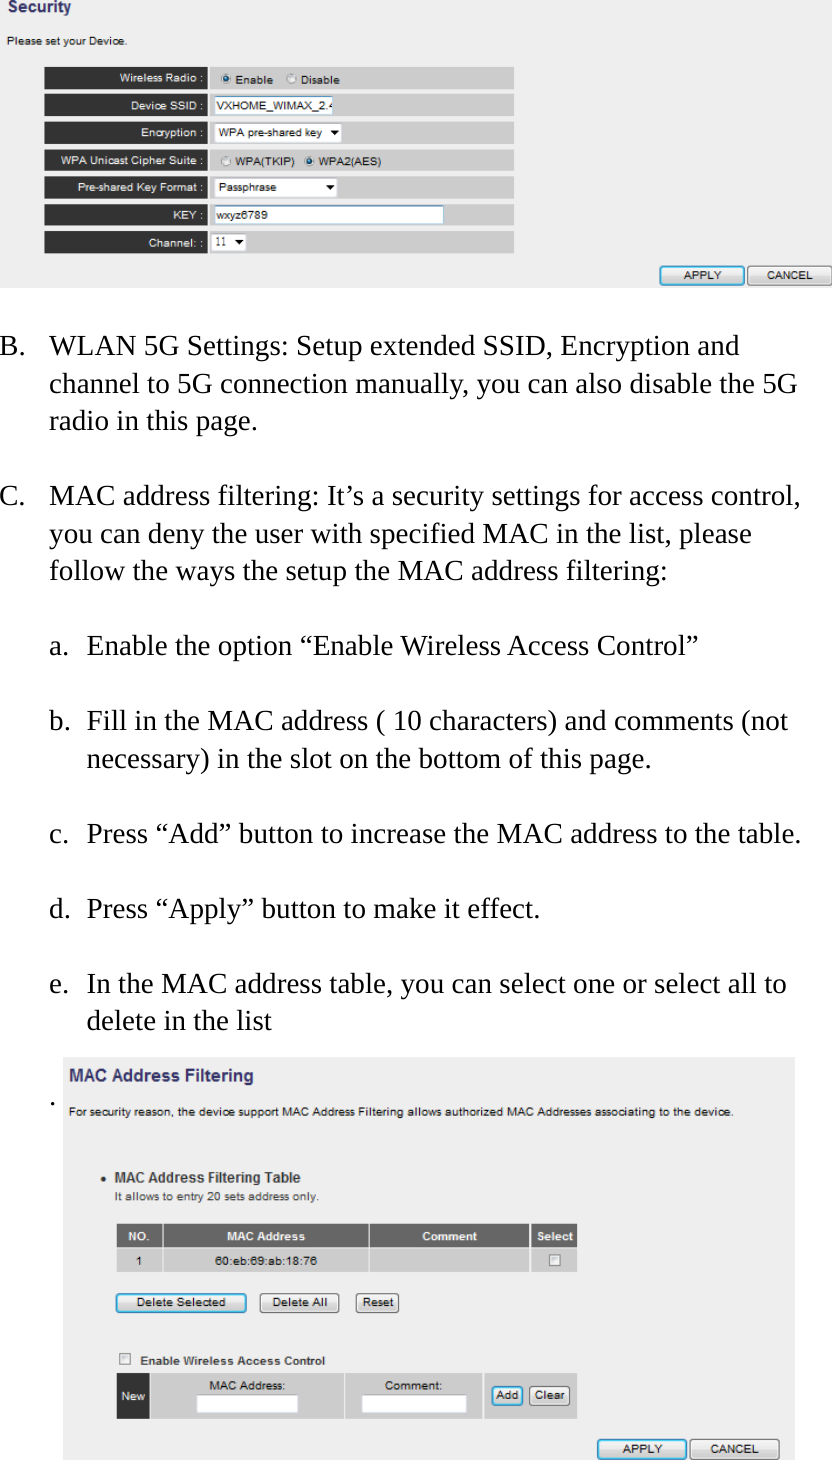 17   B. WLAN 5G Settings: Setup extended SSID, Encryption and channel to 5G connection manually, you can also disable the 5G radio in this page. C. MAC address filtering: It’s a security settings for access control, you can deny the user with specified MAC in the list, please follow the ways the setup the MAC address filtering: a. Enable the option “Enable Wireless Access Control” b. Fill in the MAC address ( 10 characters) and comments (not necessary) in the slot on the bottom of this page. c. Press “Add” button to increase the MAC address to the table. d. Press “Apply” button to make it effect. e. In the MAC address table, you can select one or select all to delete in the list .     